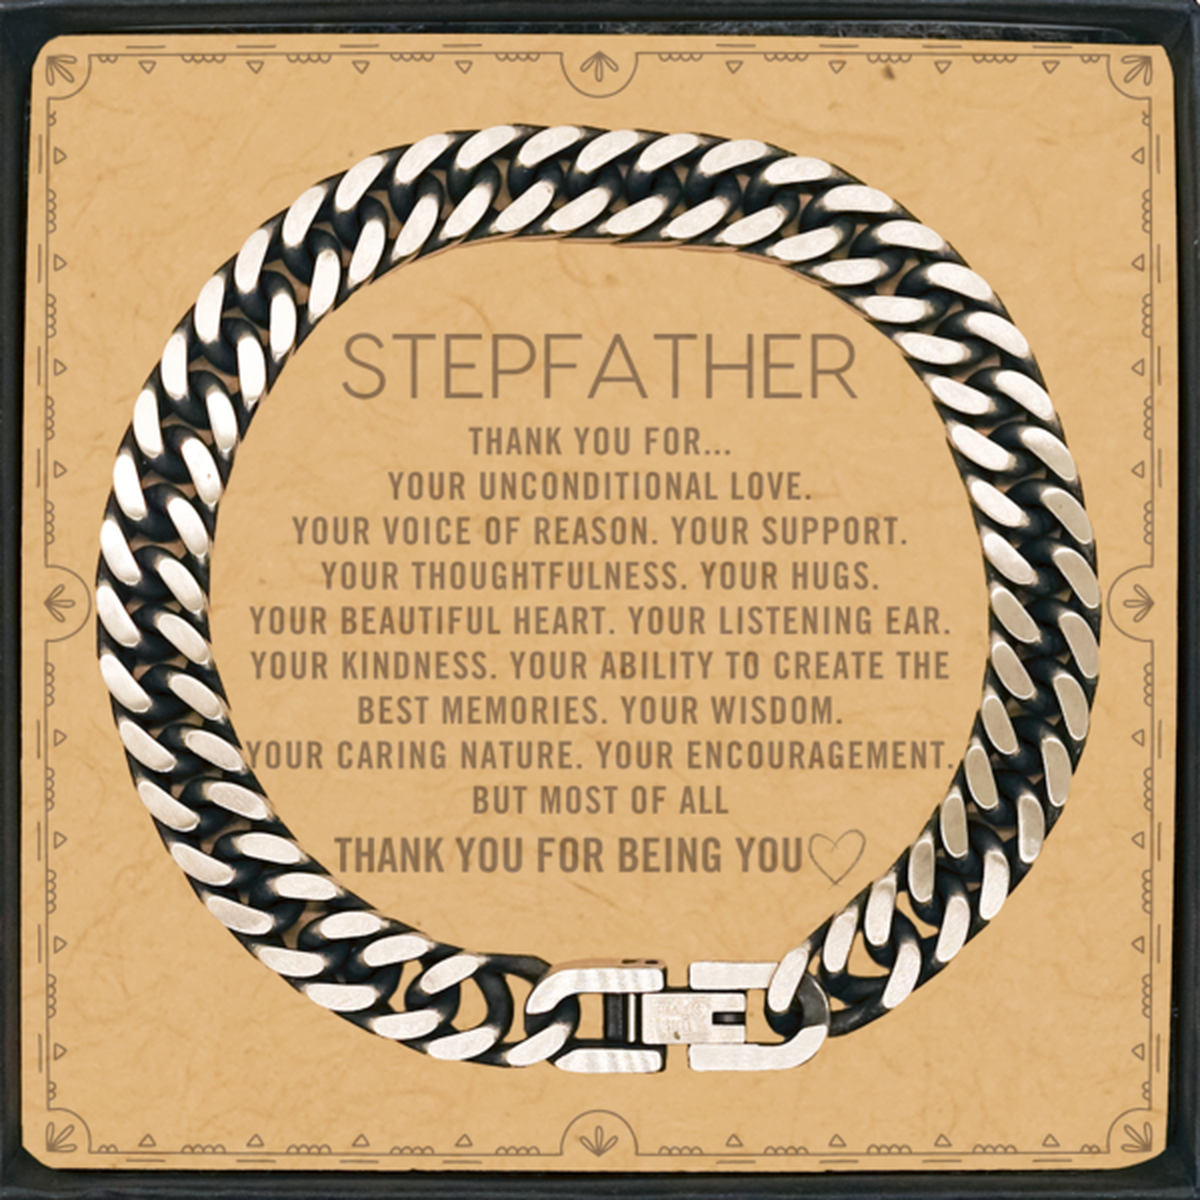 Stepfather Cuban Link Chain Bracelet Custom, Message Card Gifts For Stepfather Christmas Graduation Birthday Gifts for Men Women Stepfather Thank you for Your unconditional love